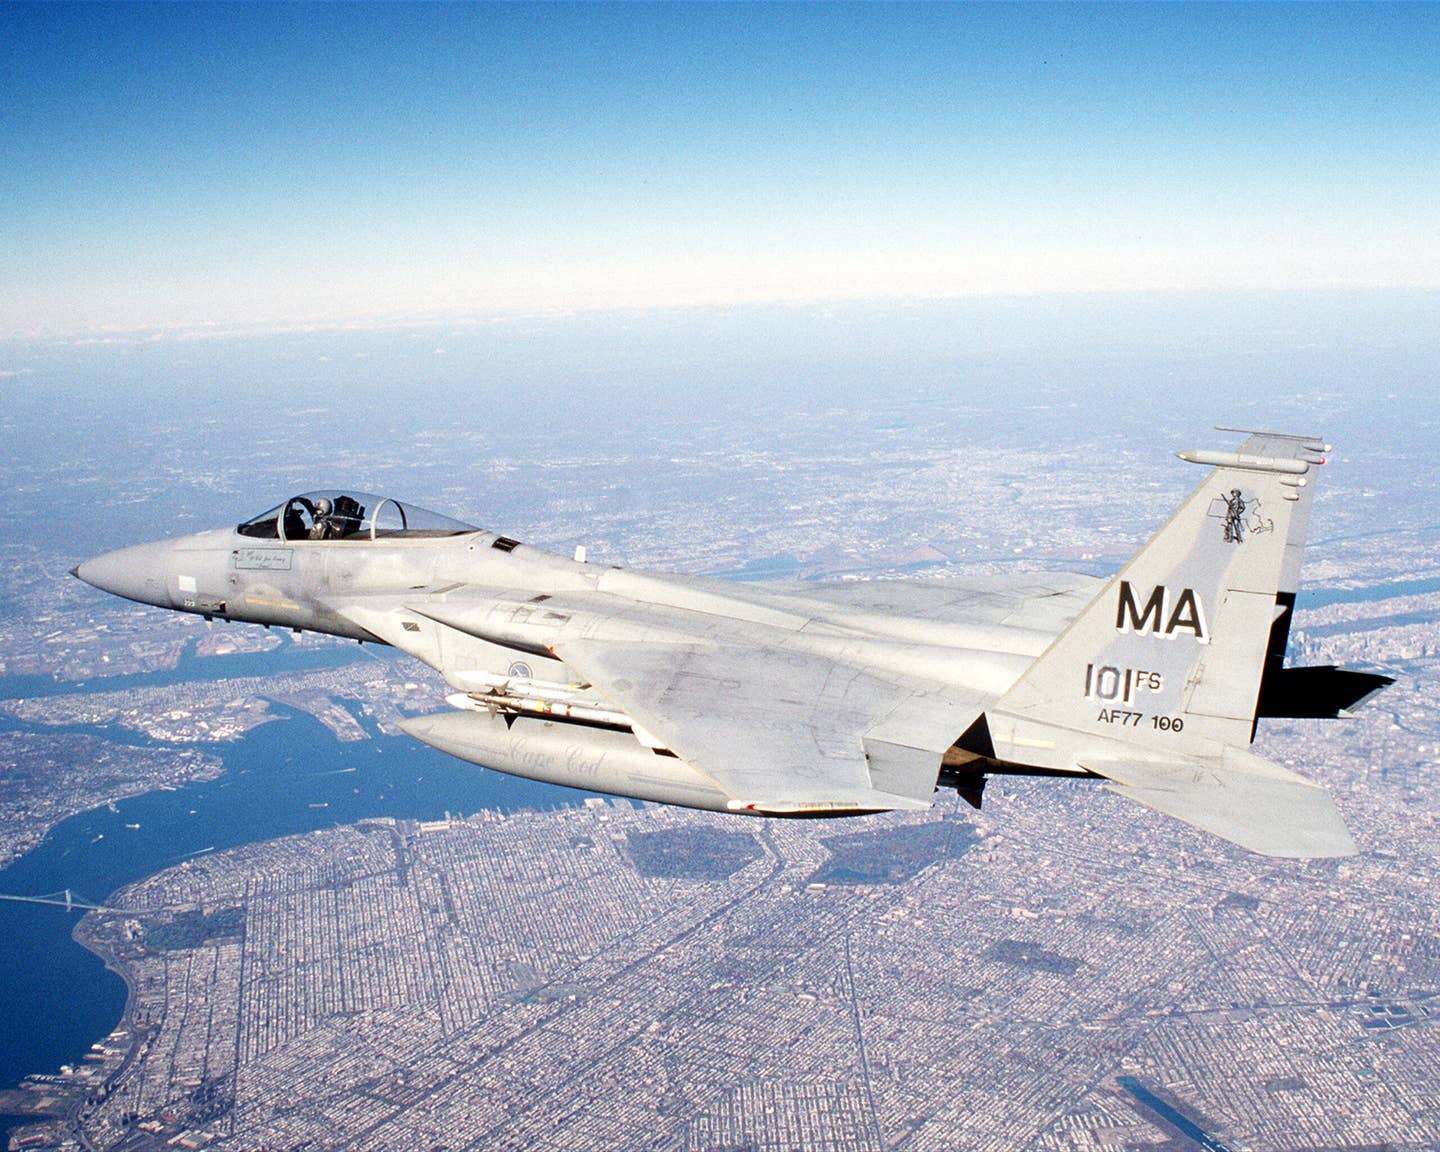 An F-15 Eagle from the Massachusetts Air National Guard"s 102nd Fighter Wing flies a combat air patrol mission over New York City November 6, 2001 in support of Operation Noble Eagle which has patrolled American skies since September 11, 2001. <em>Credit: Photo by Lt. Col. Bill Ramsay/U.S. Air Force/Getty Images</em>